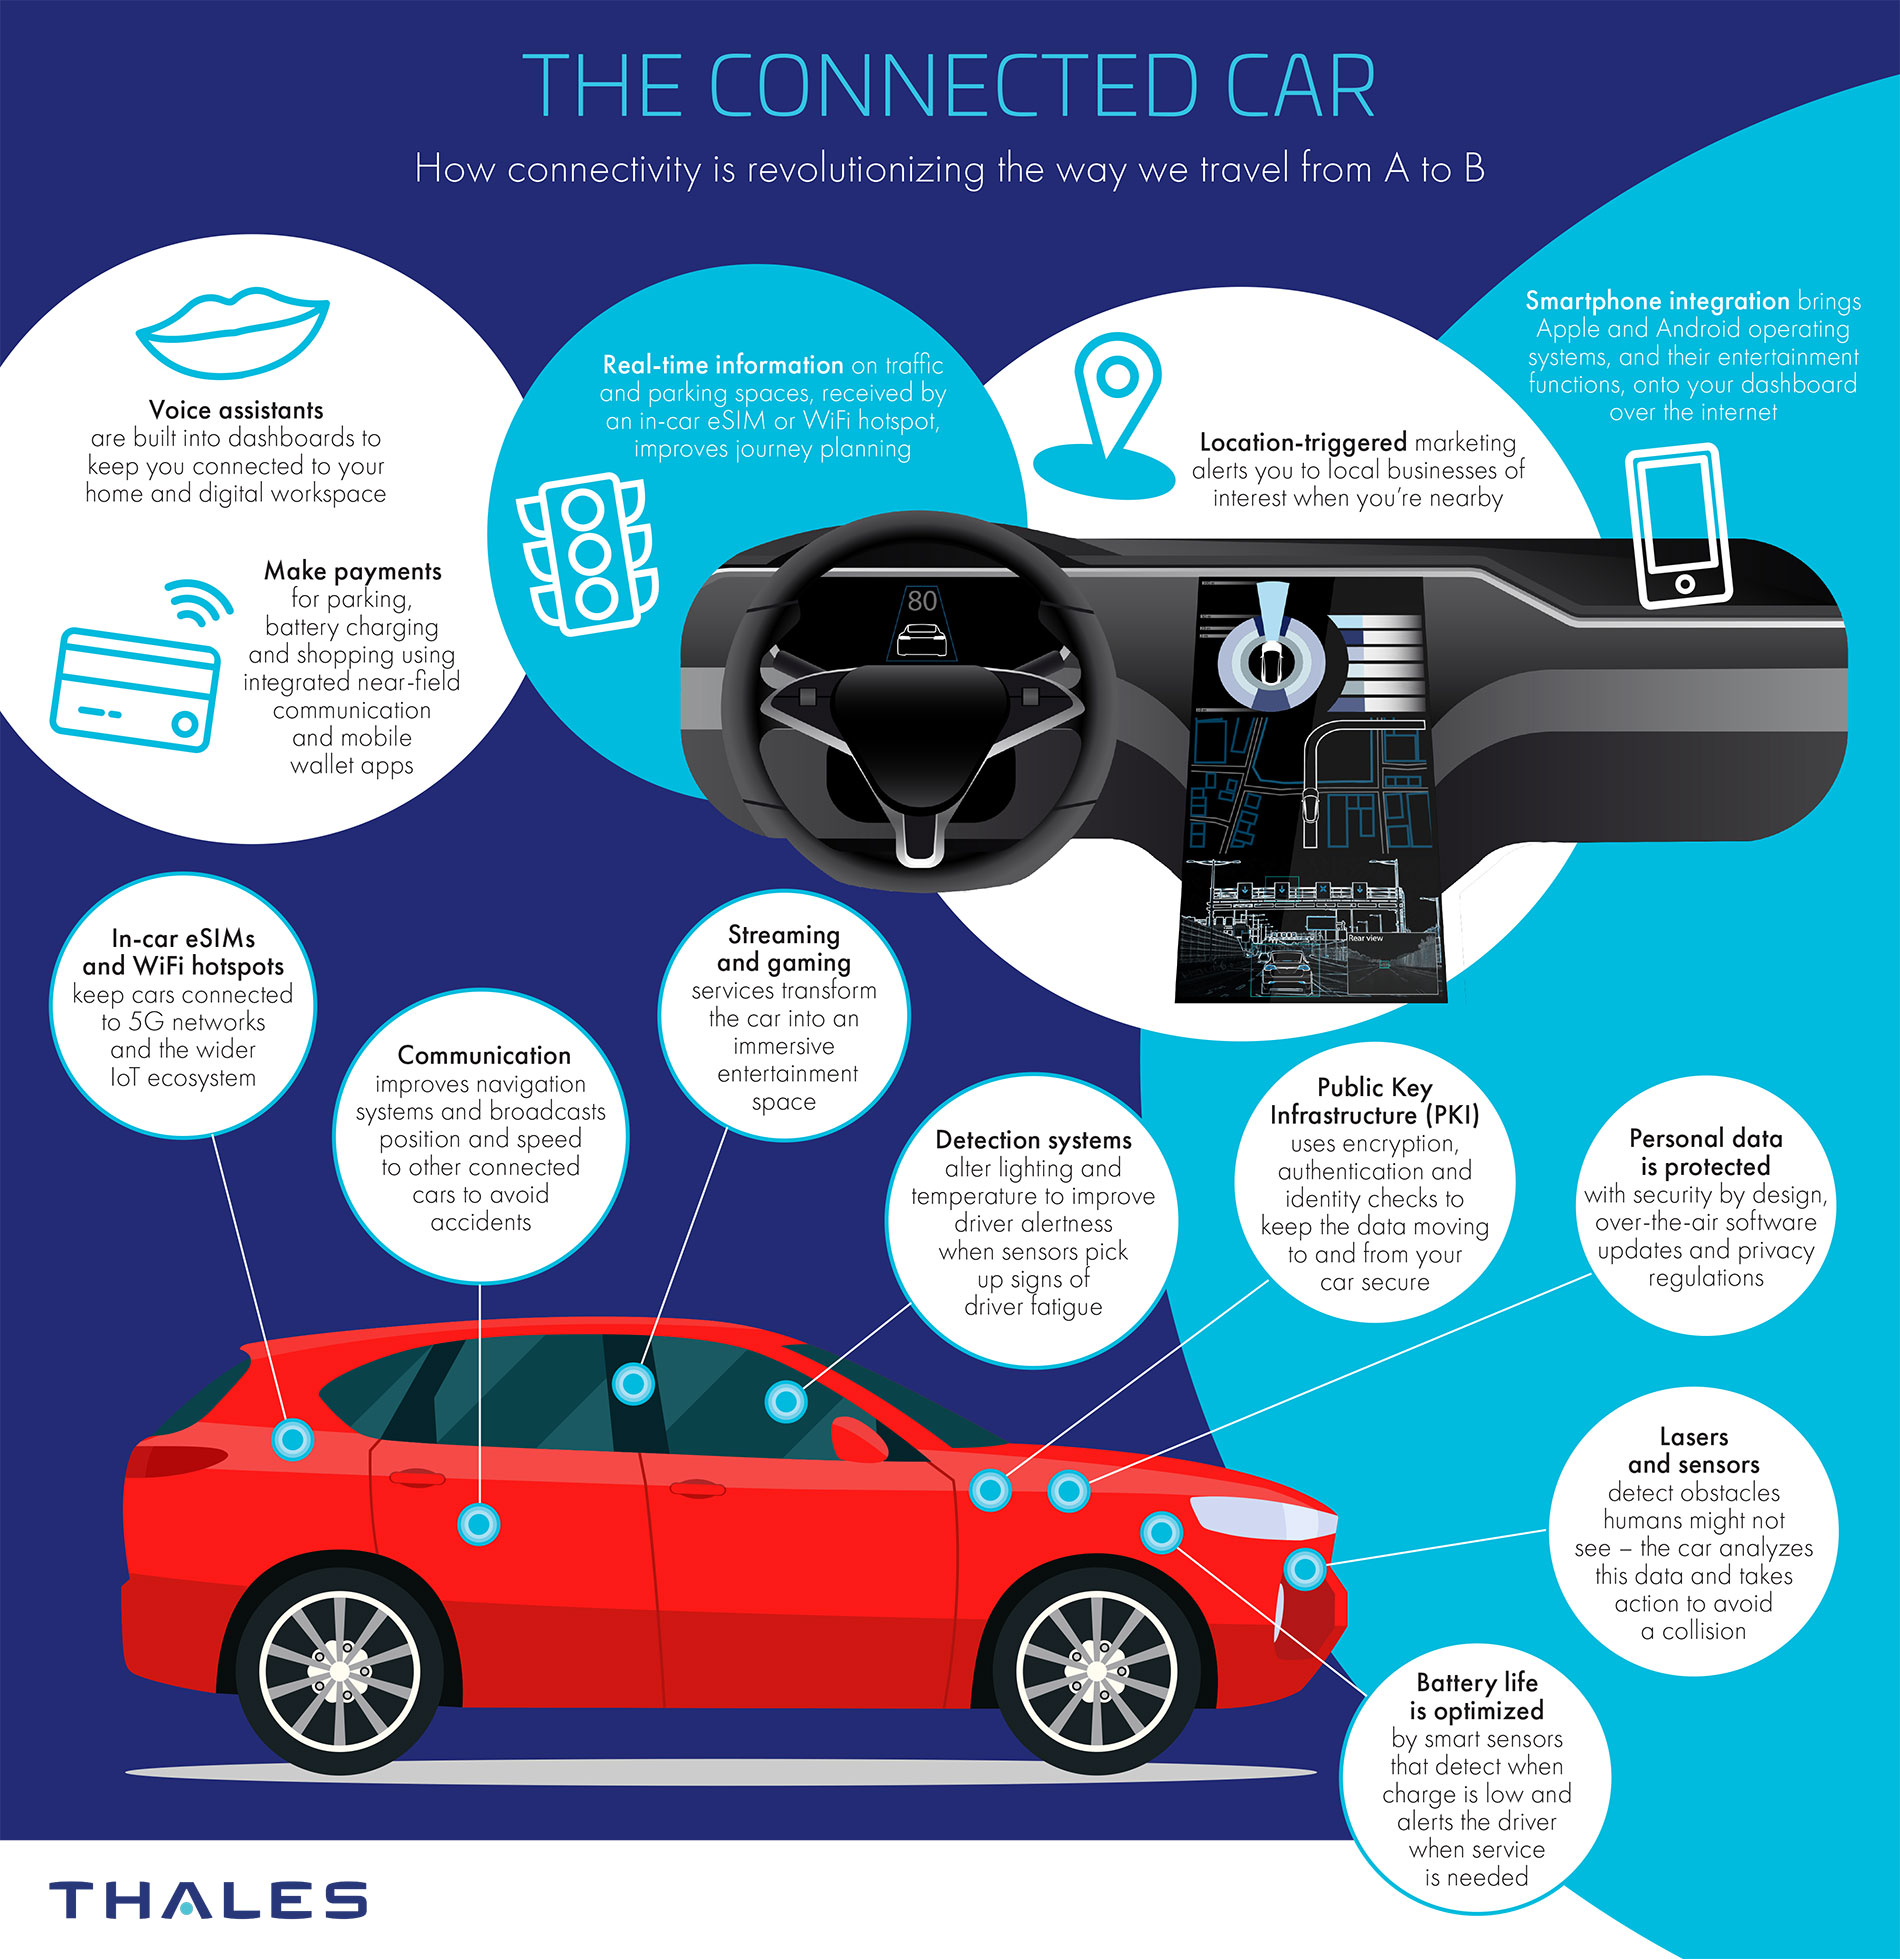 The connected car